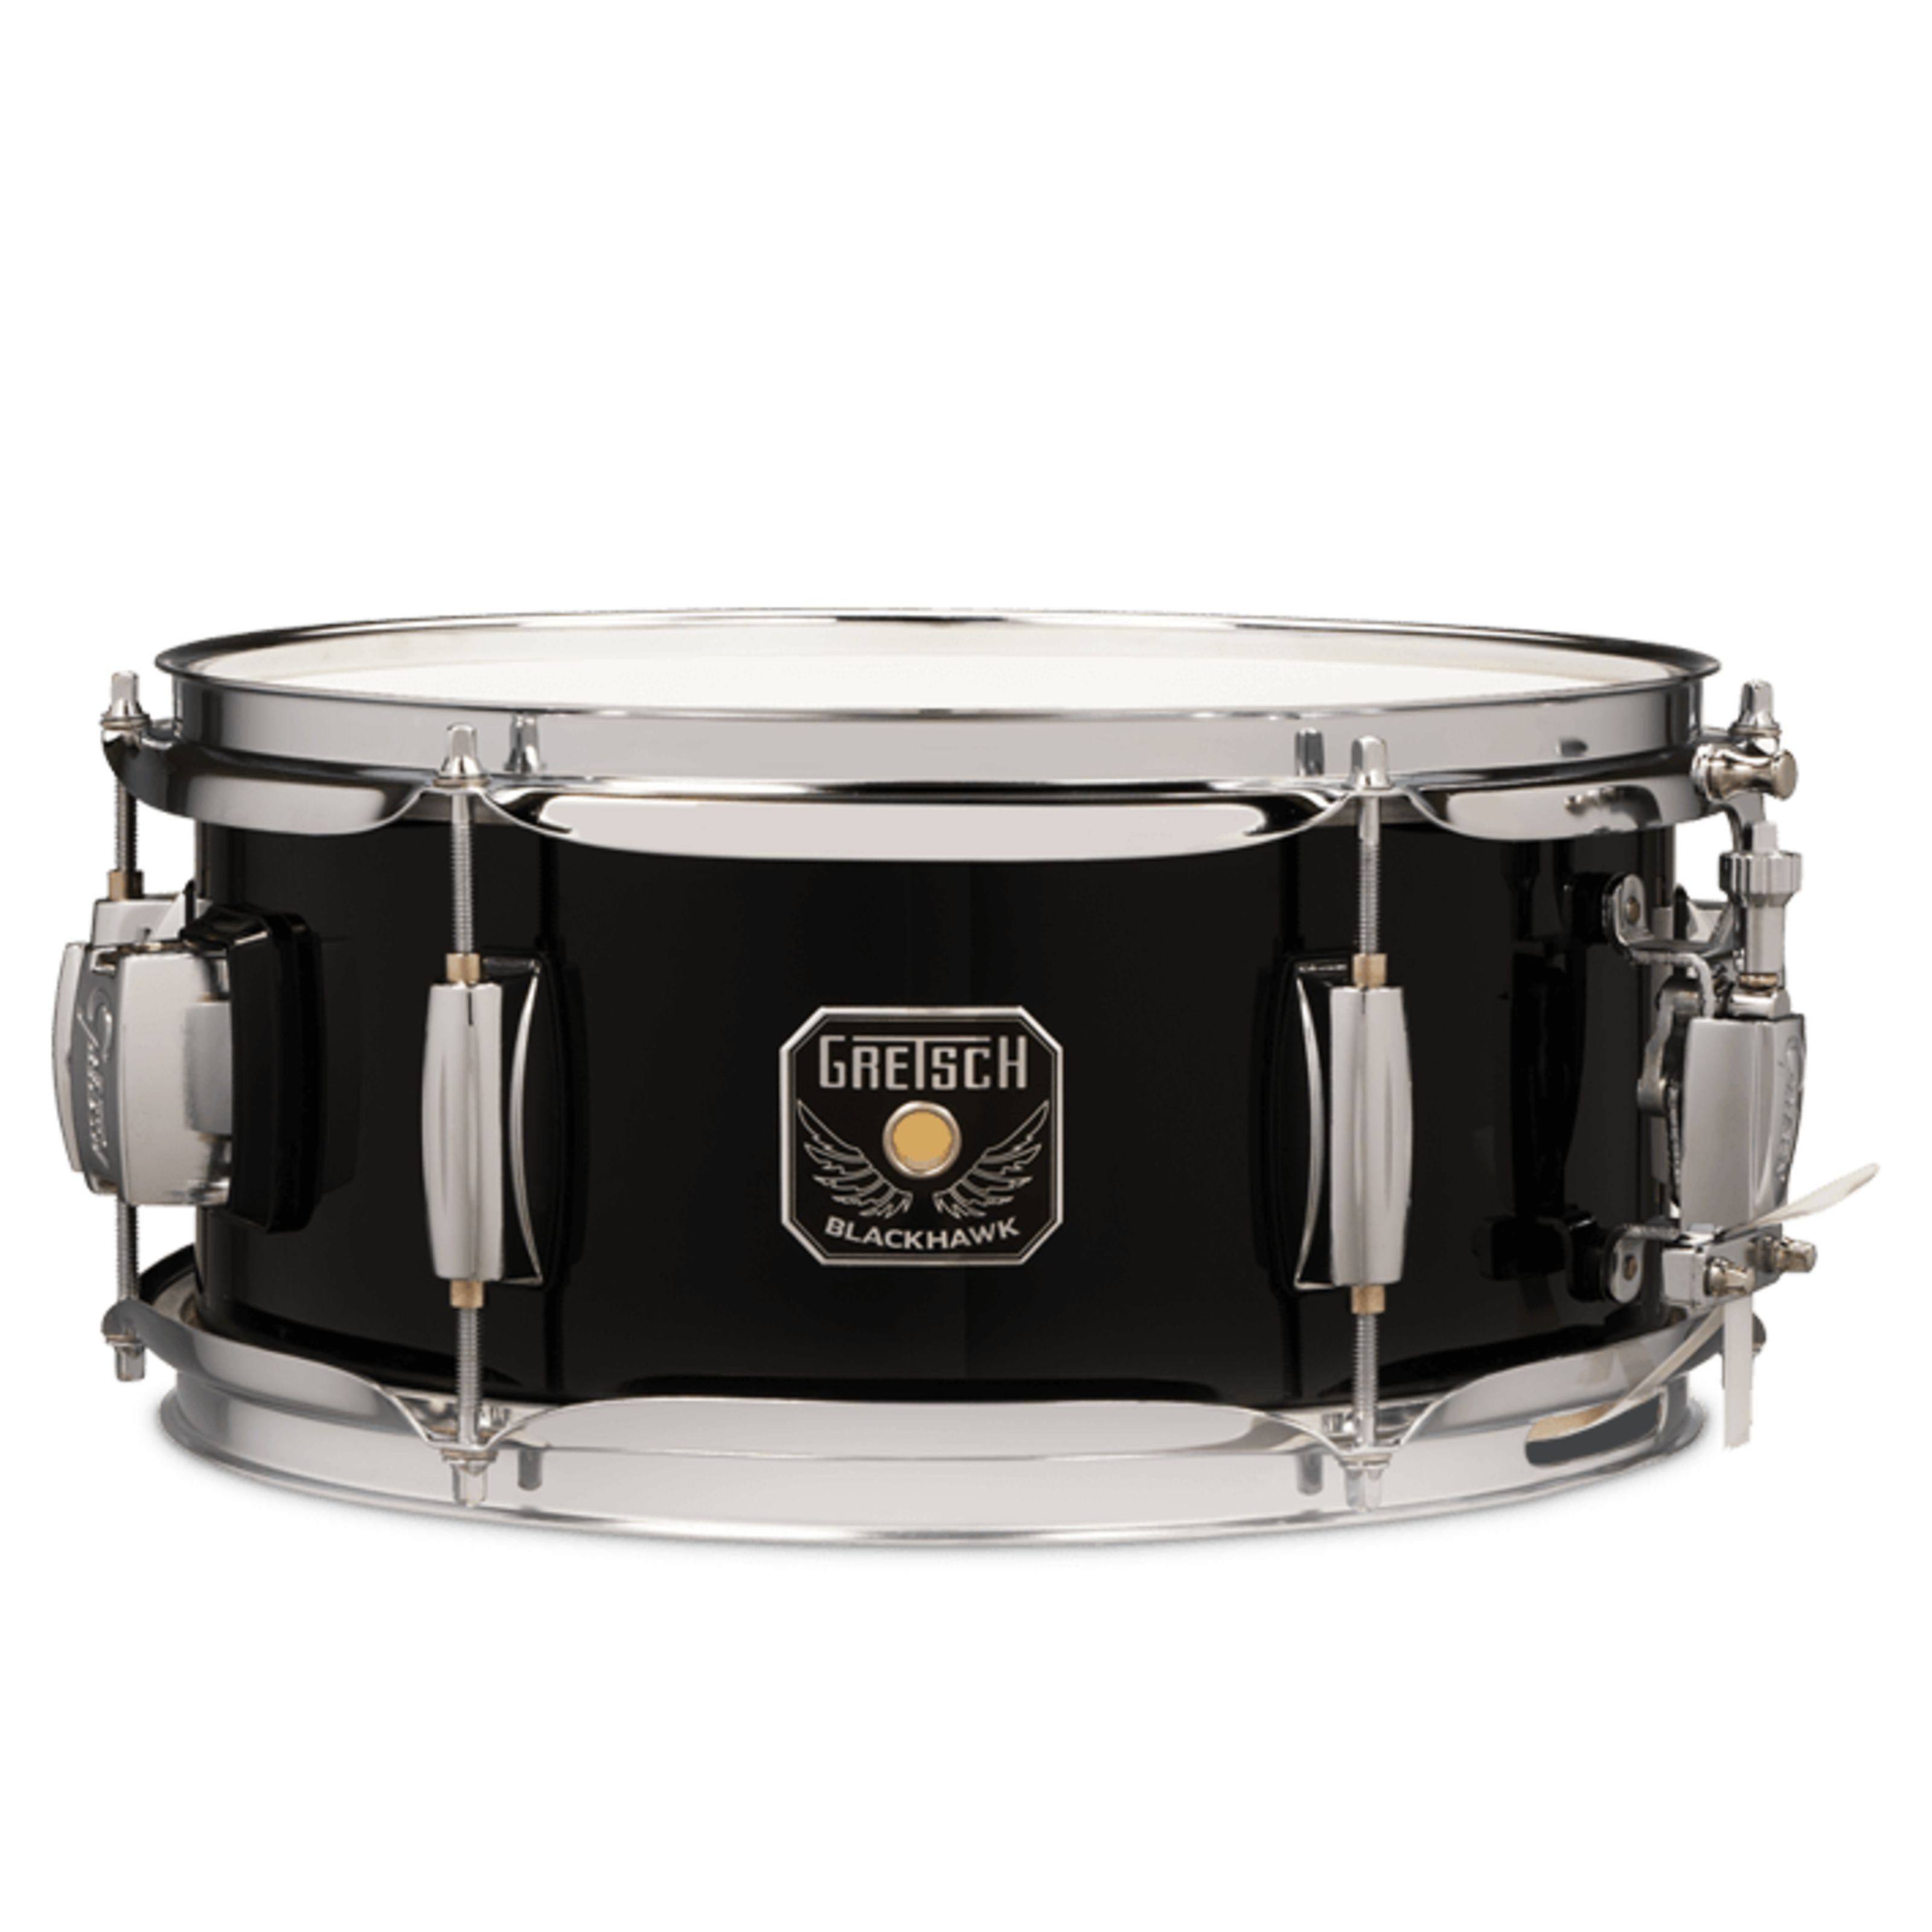 Gretsch Snare Drum,Mighty Mini Snare 12"x5,5", Black, incl. GTS Mount, Schlagzeuge, Snare Drums, Mighty Mini Snare 12"x5,5" Black GTS Mount - Snare Drum